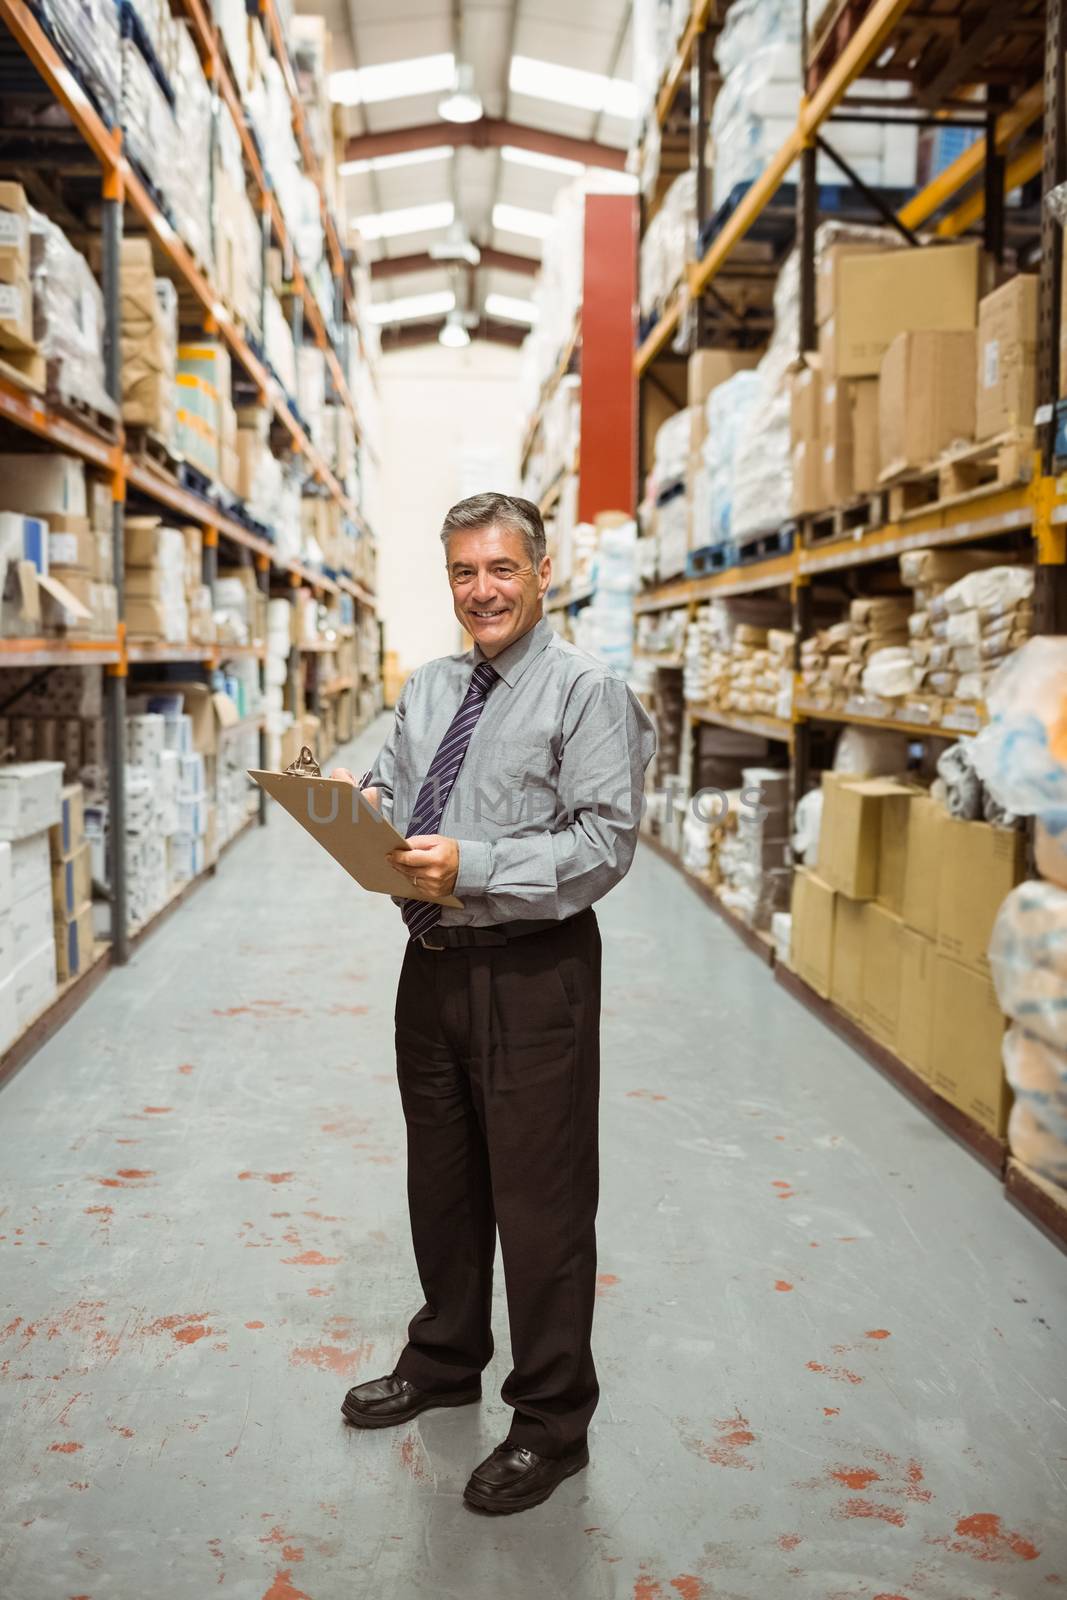 Smiling warehouse manager writing on clipboard in a large warehouse